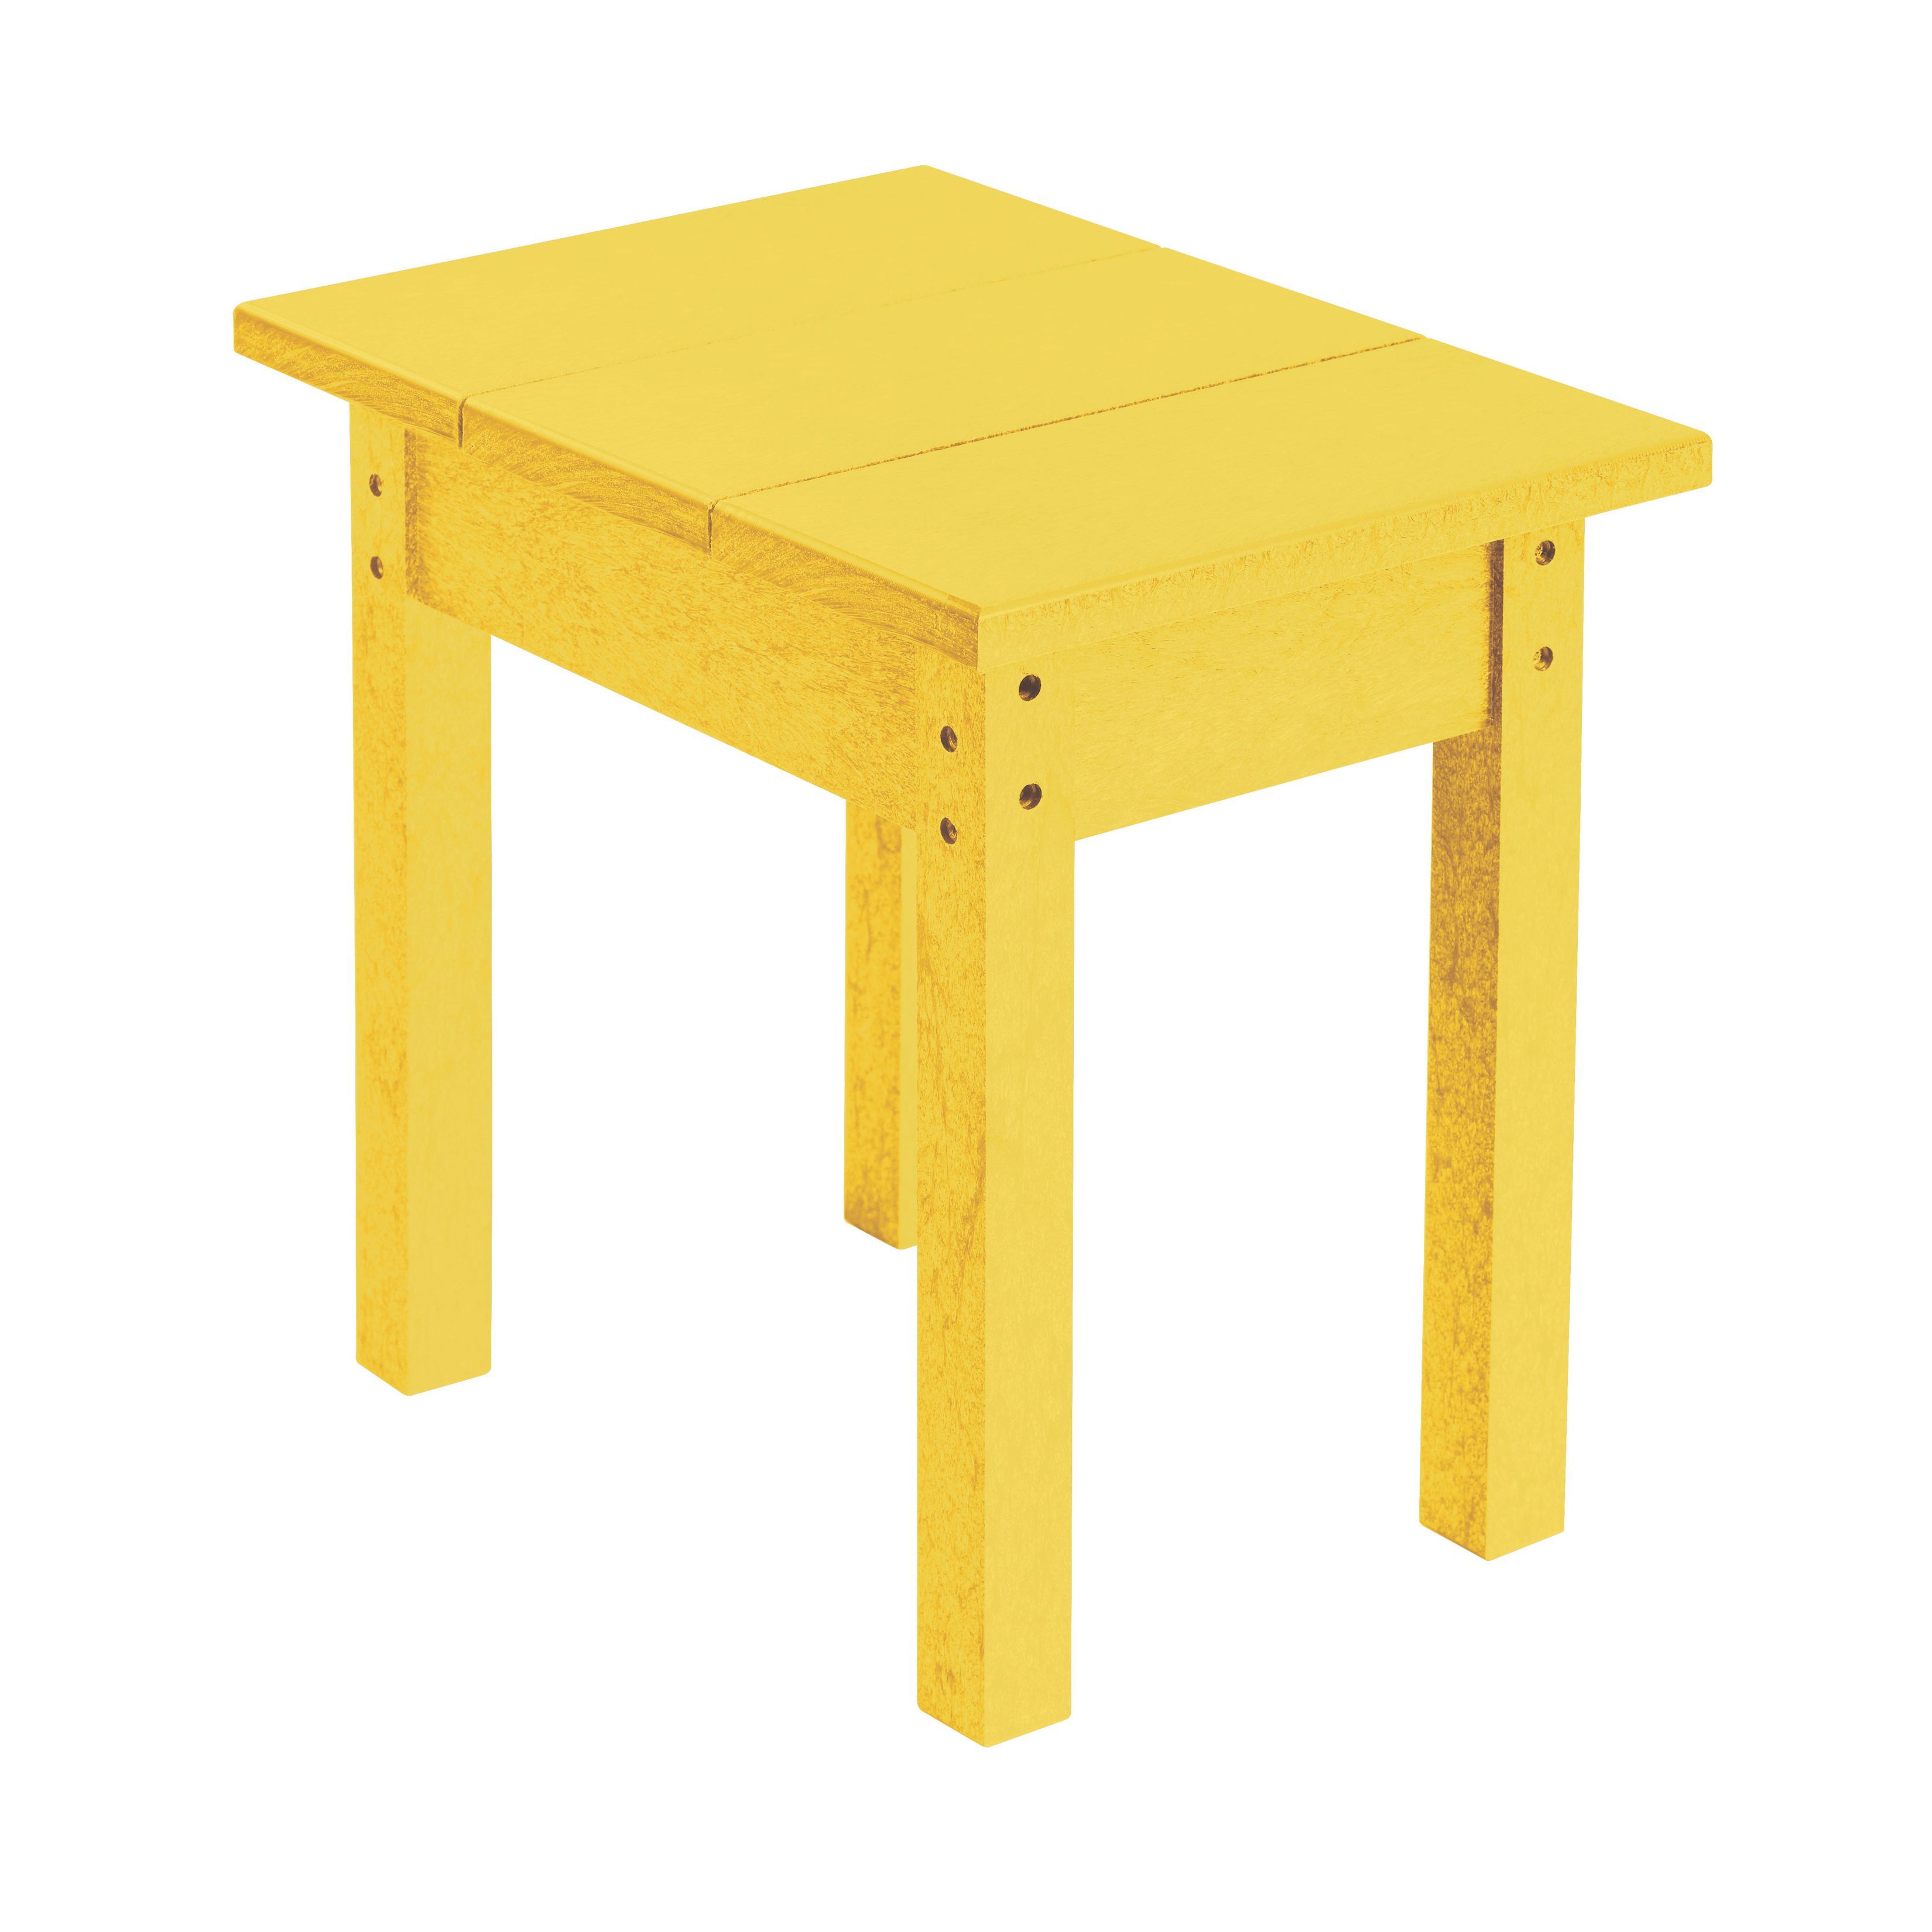 plastic products generations yellow small side table patio outdoor furniture turquoise entry piece dining set brown wicker end offset umbrella antique mirror console glass tables